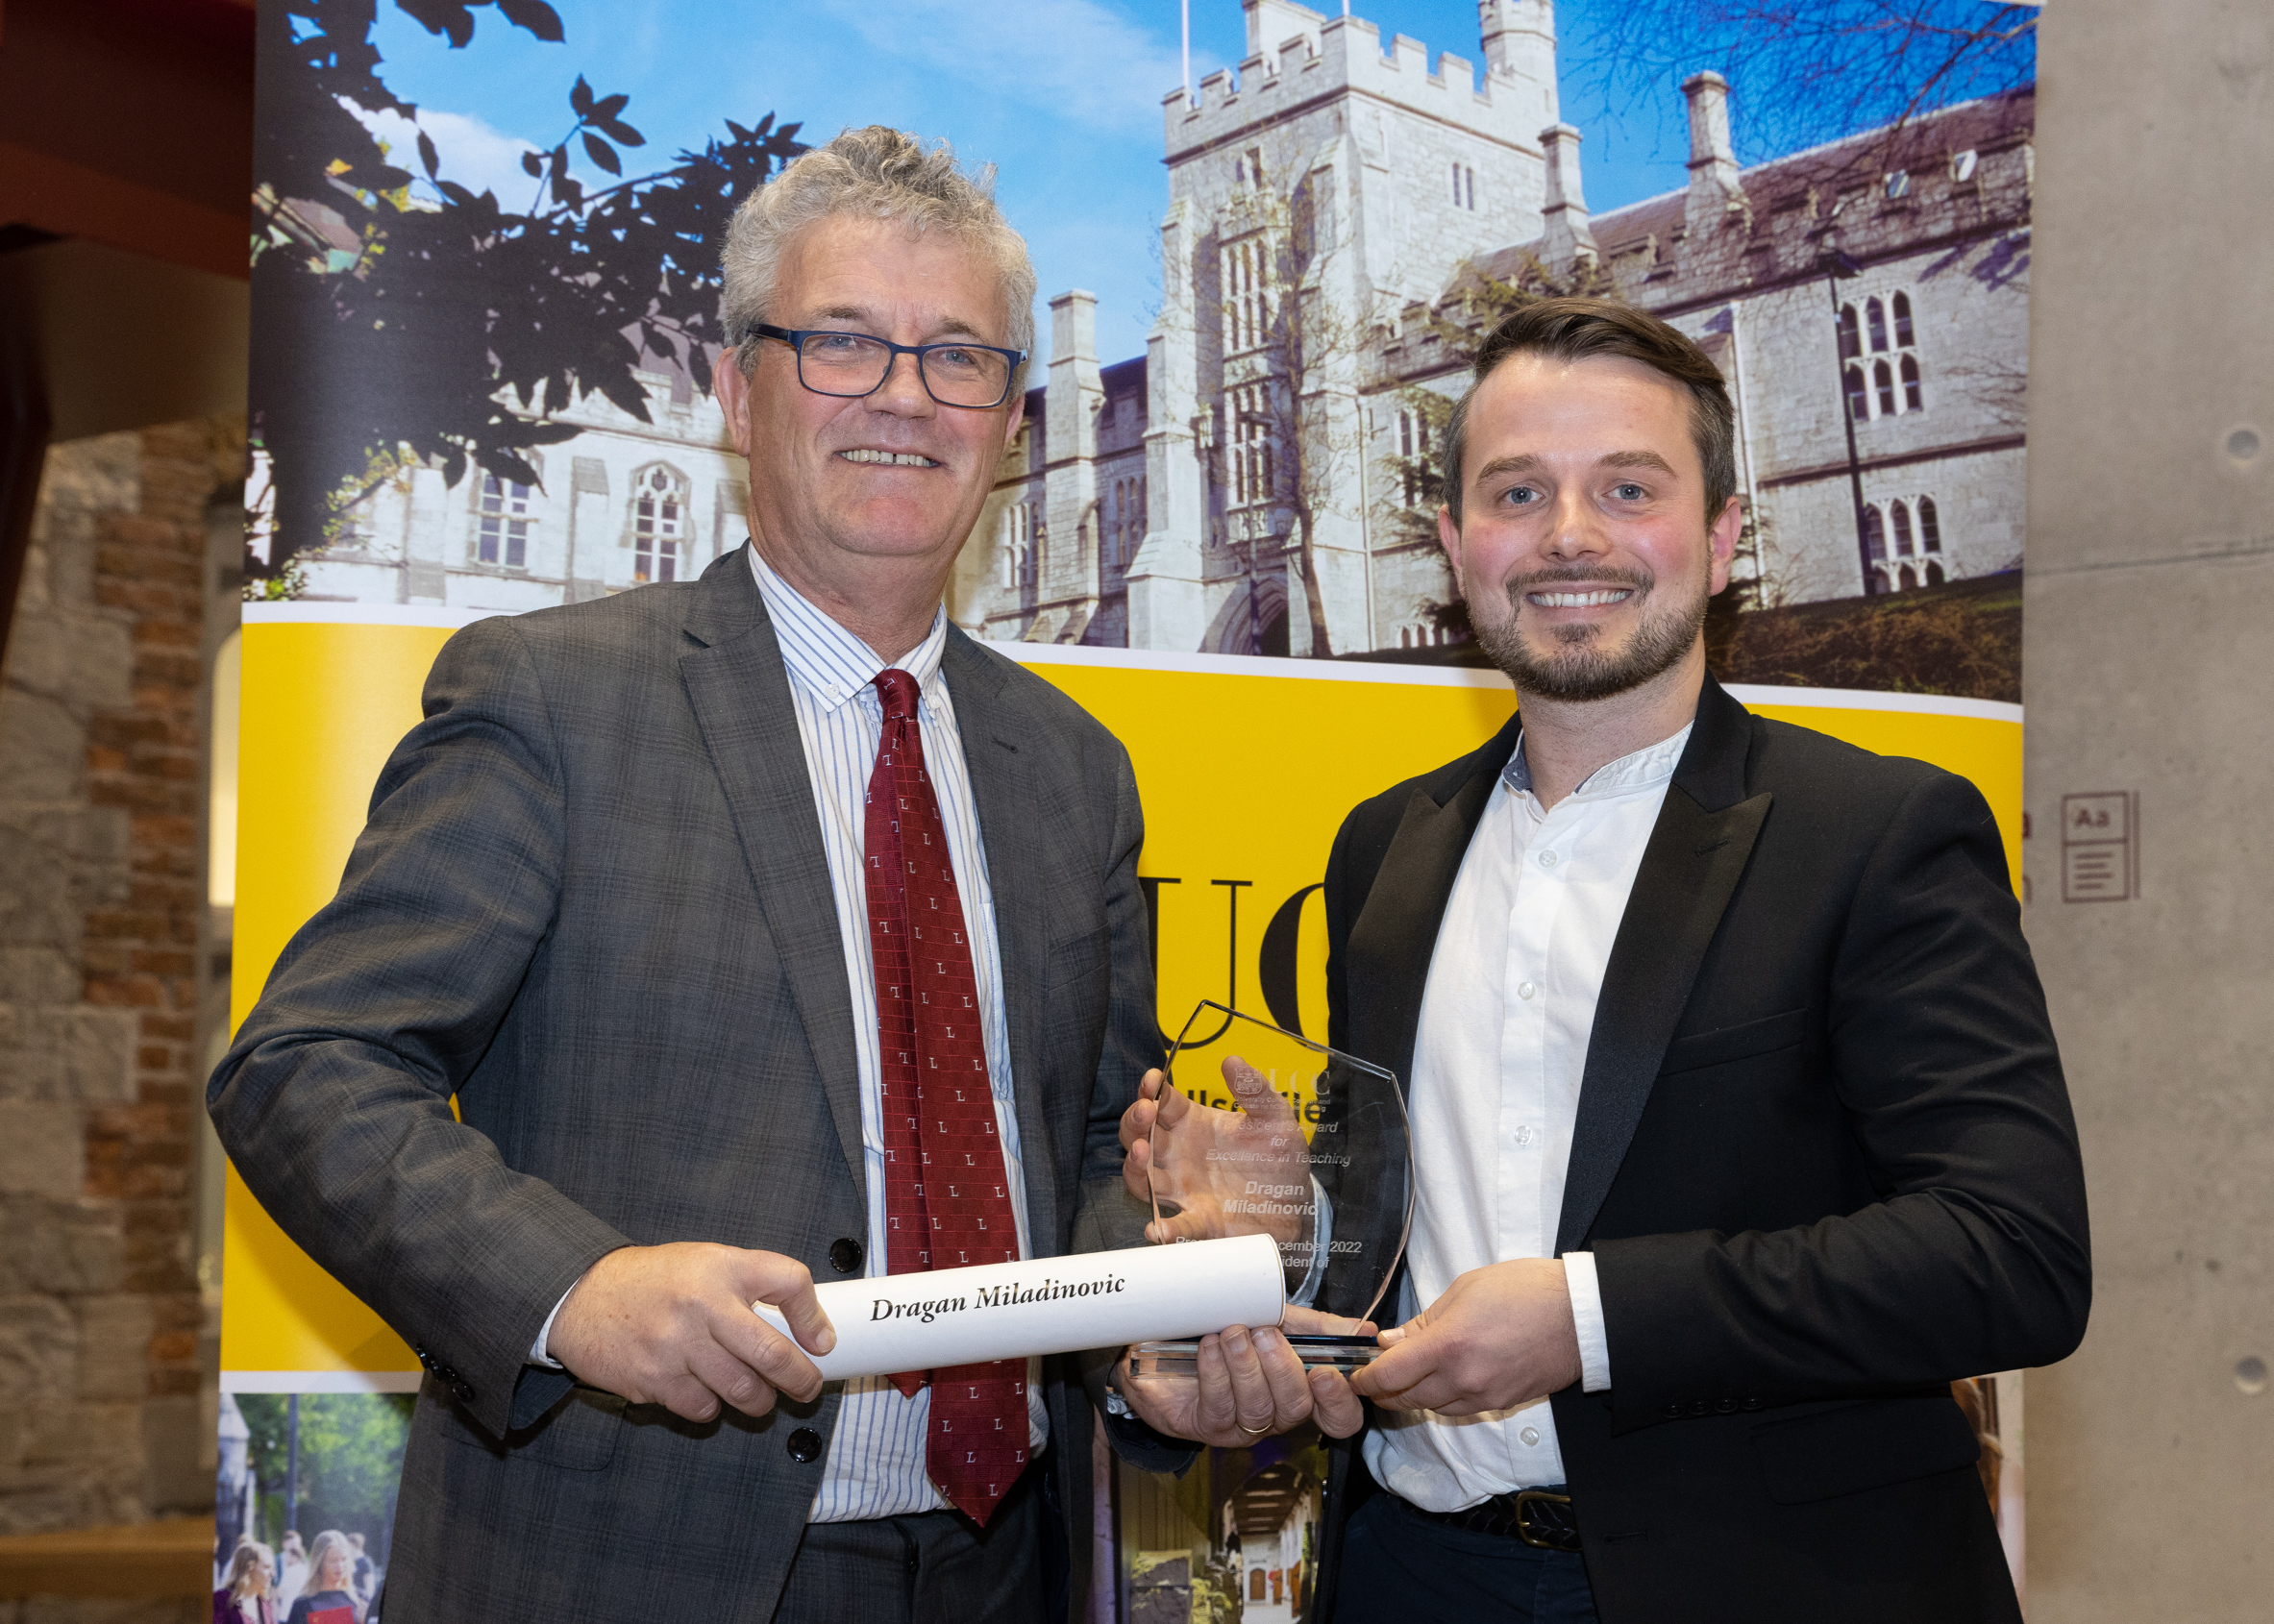 Dragan Miladinović receives UCC President's Award for Excellence in Teaching